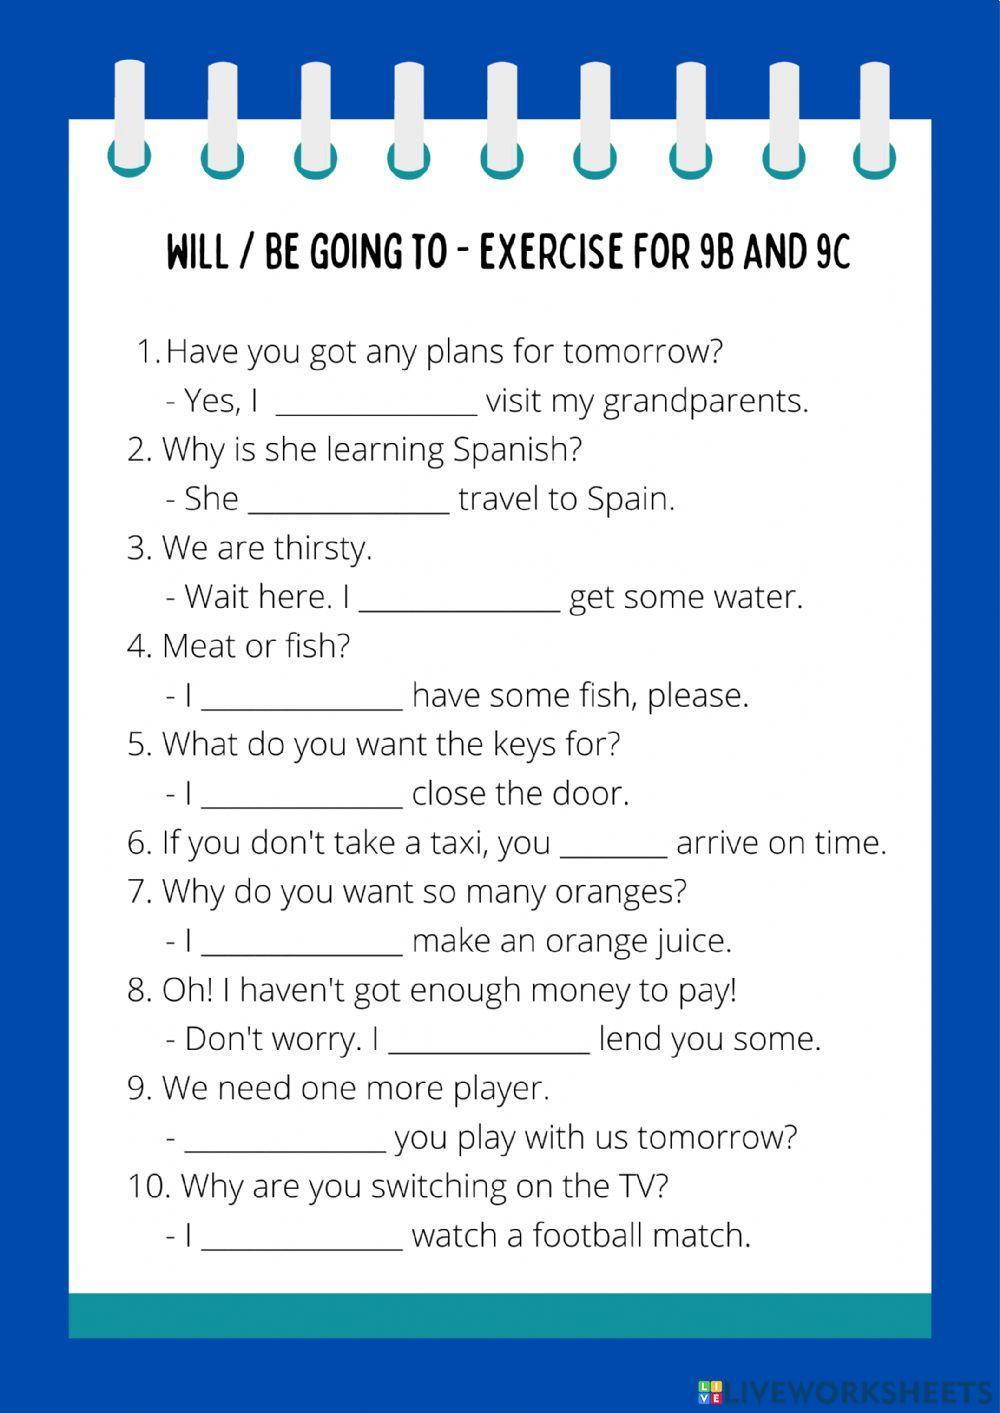 Will and be going to - exercise